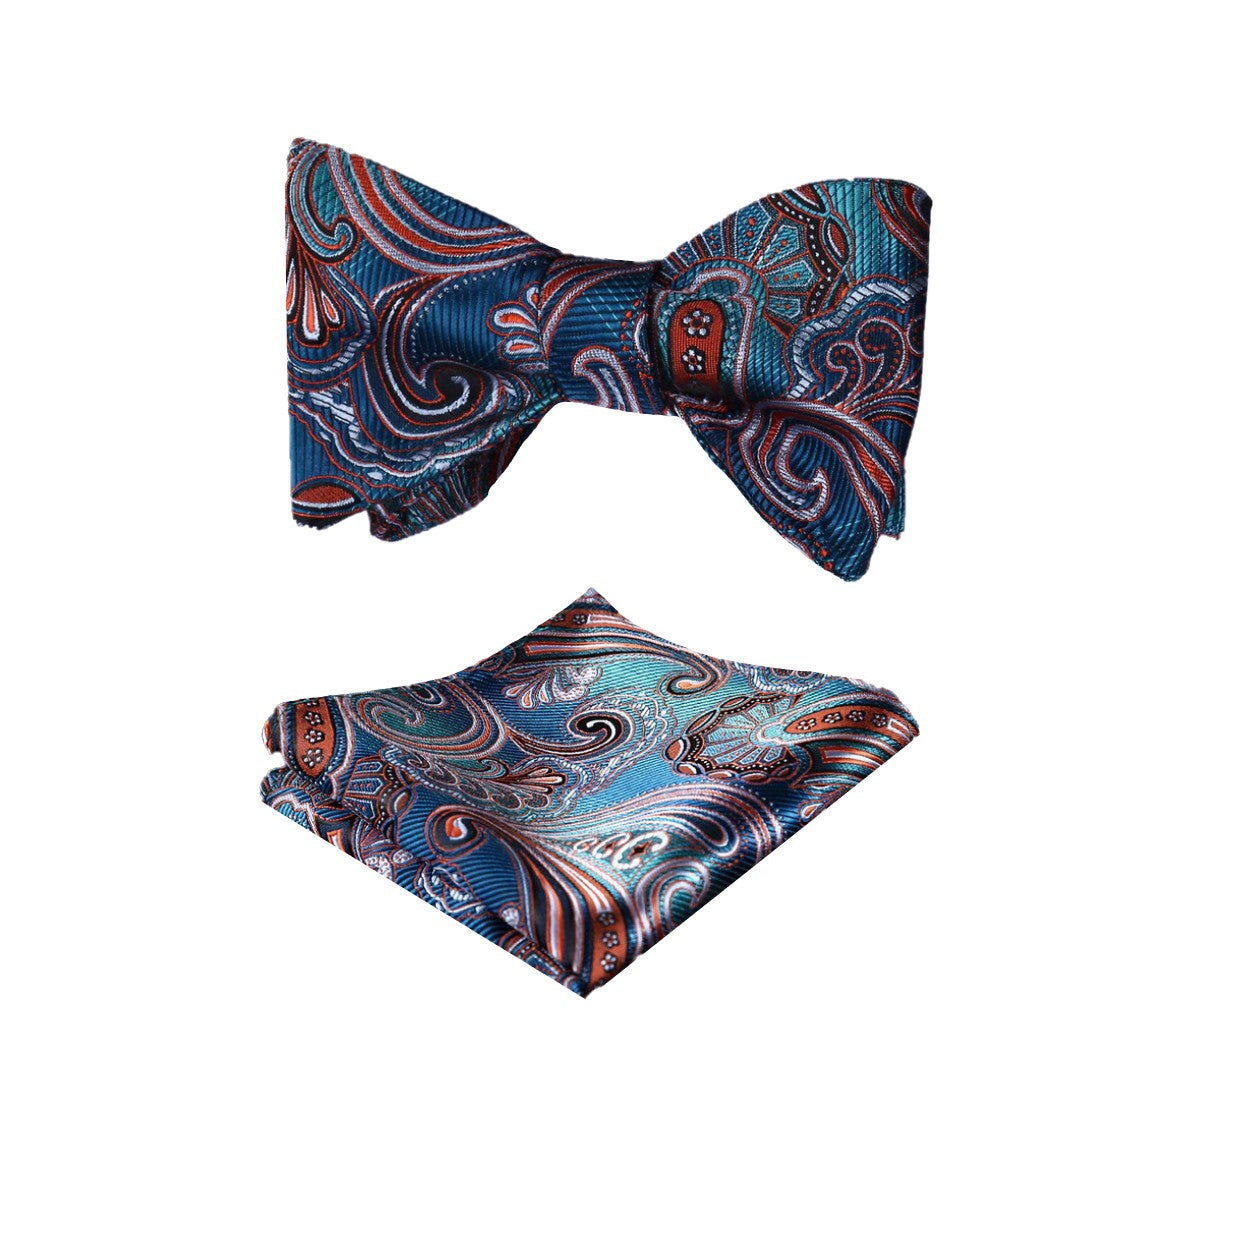 A Teal, Orange Paisley Pattern Silk Bow Tie and Matching Silk Pocket Square